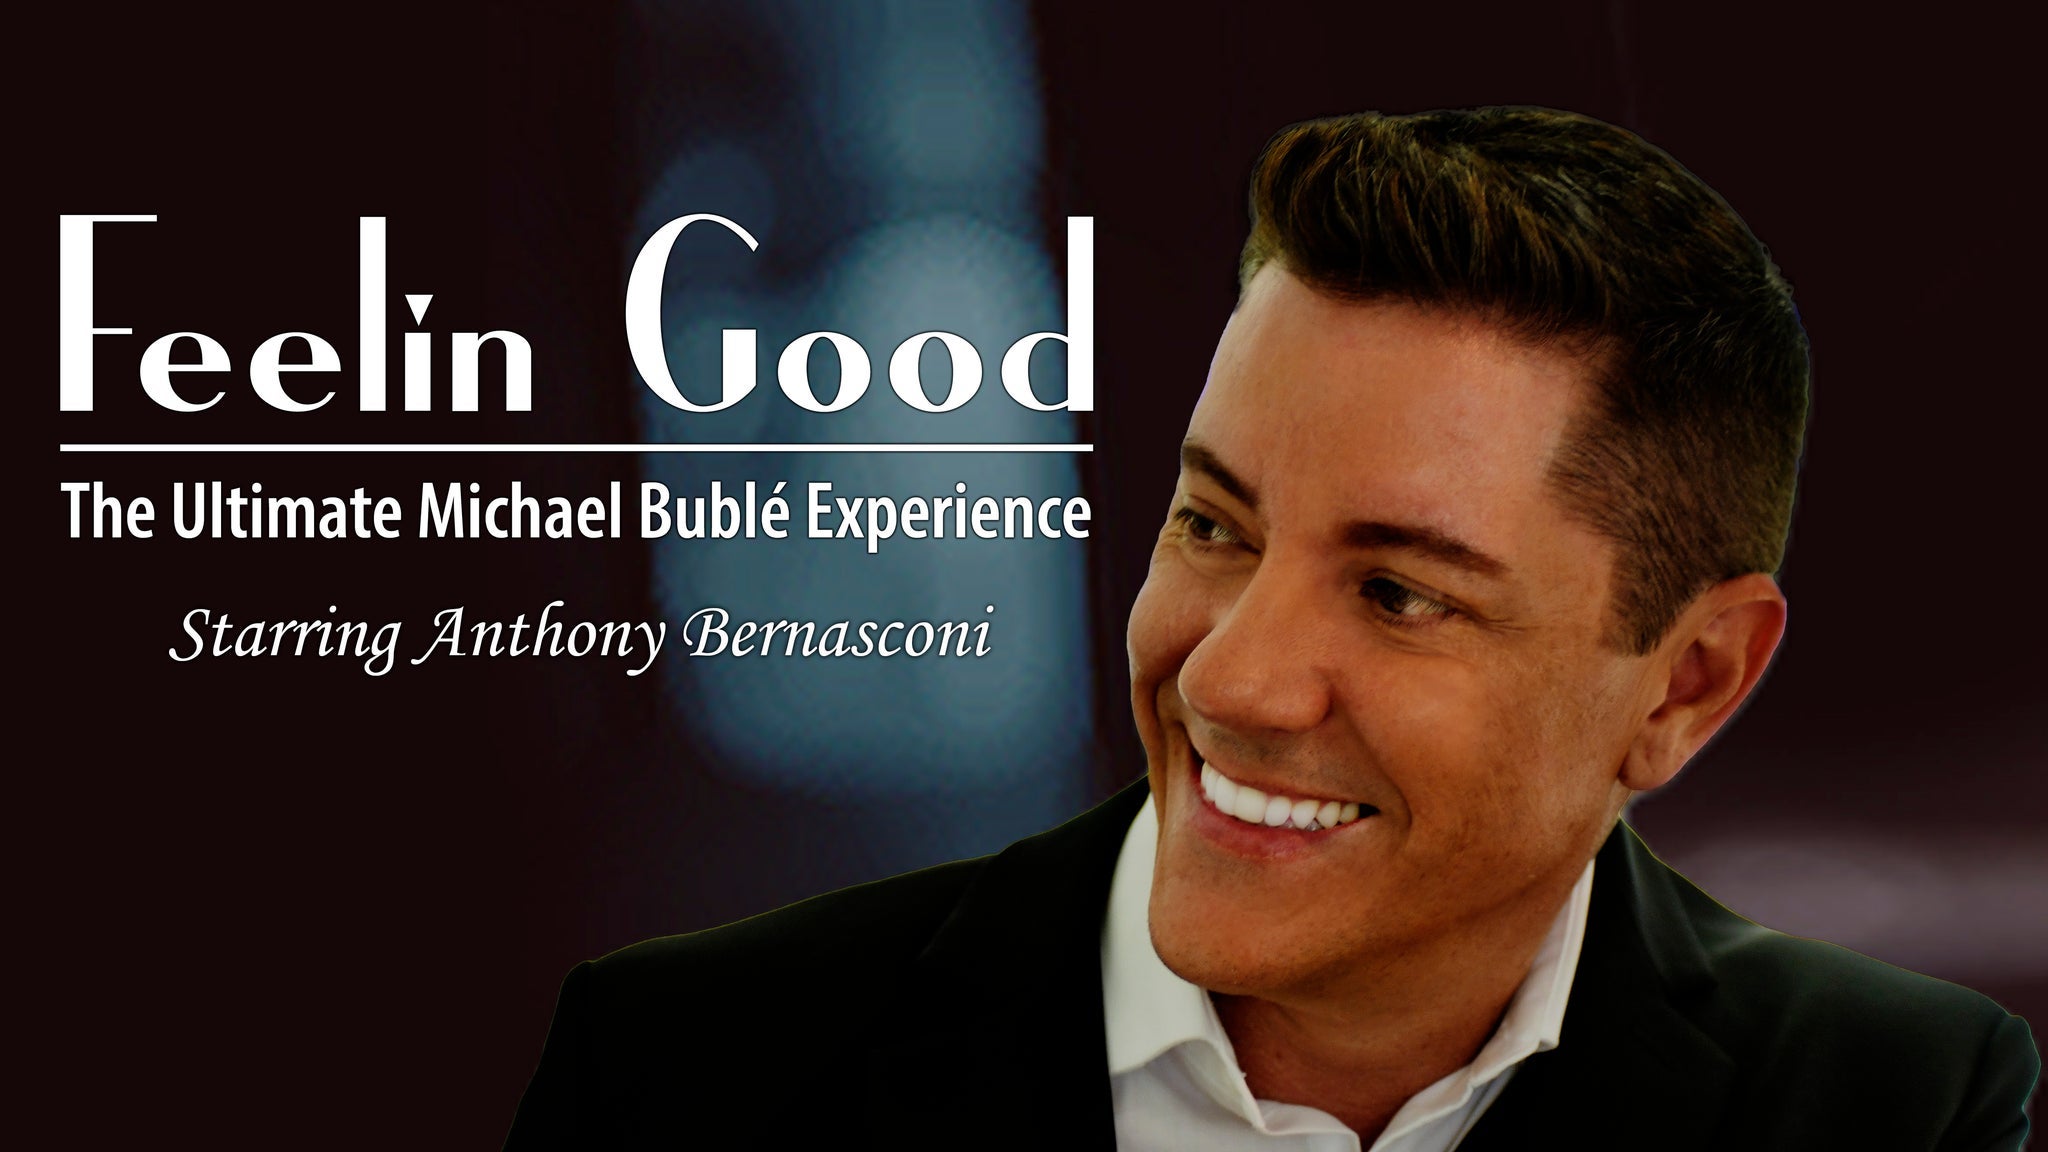 Feelin' Good: The Ultimate Michael Bublé Experience in Farmingville promo photo for Ticketmaster presale offer code